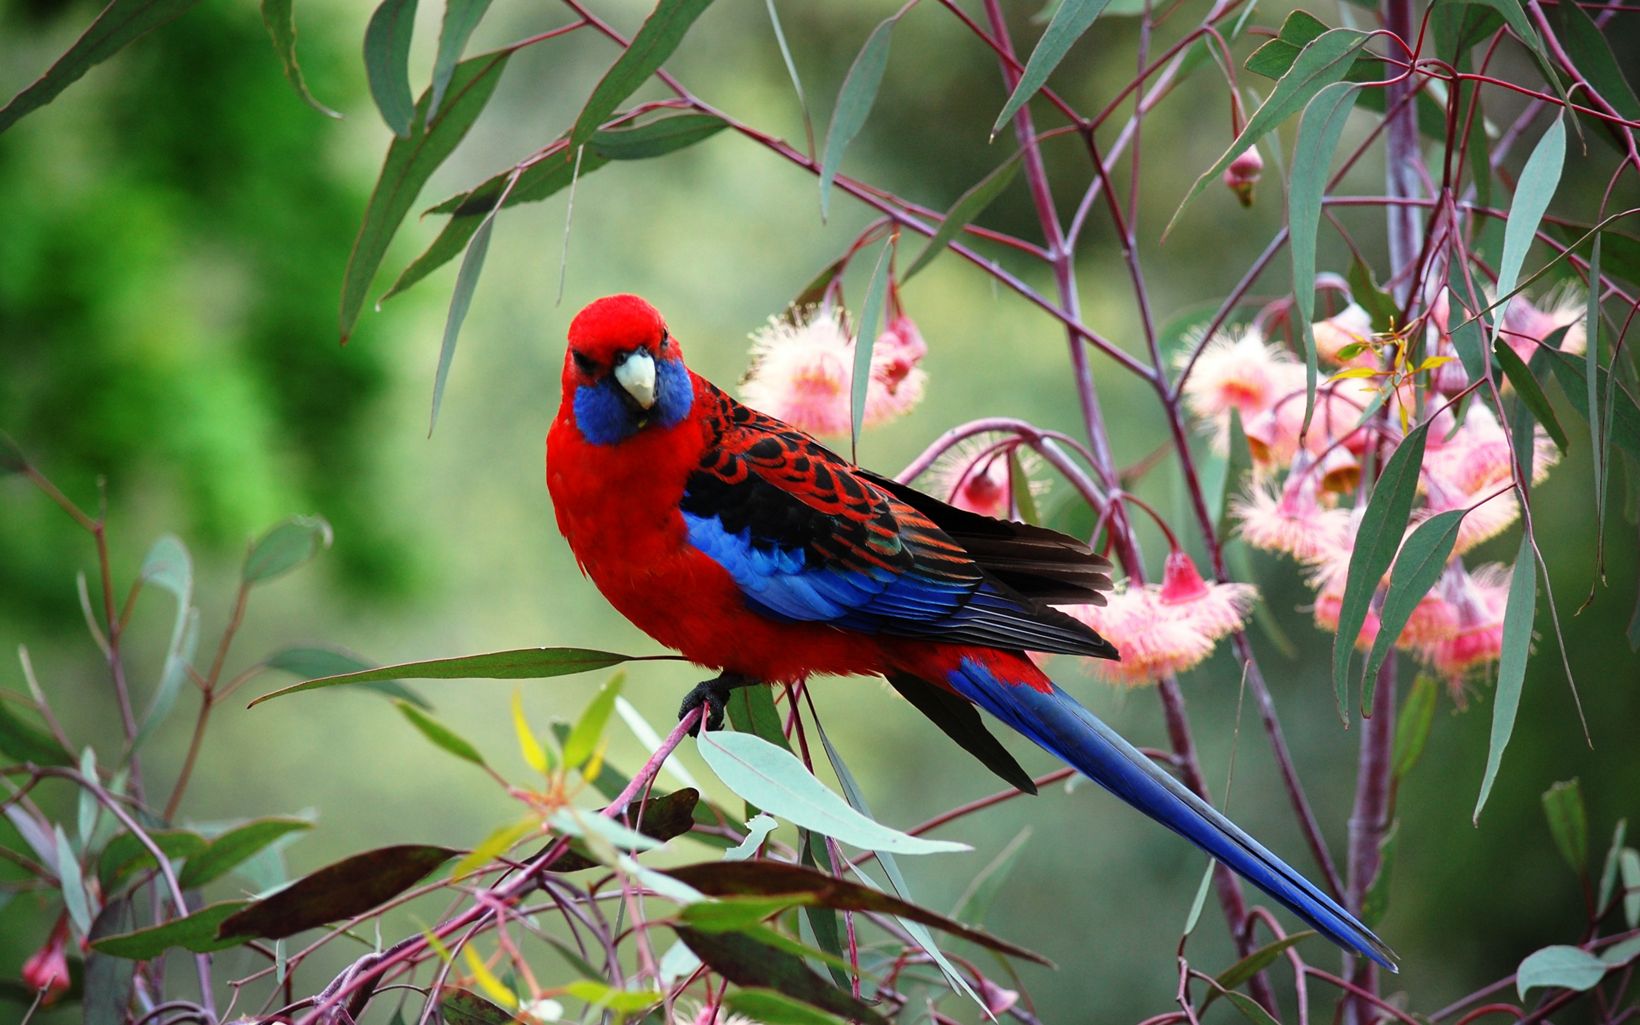 Crimson Rosella, a blue-and-red bird native to Melbourne